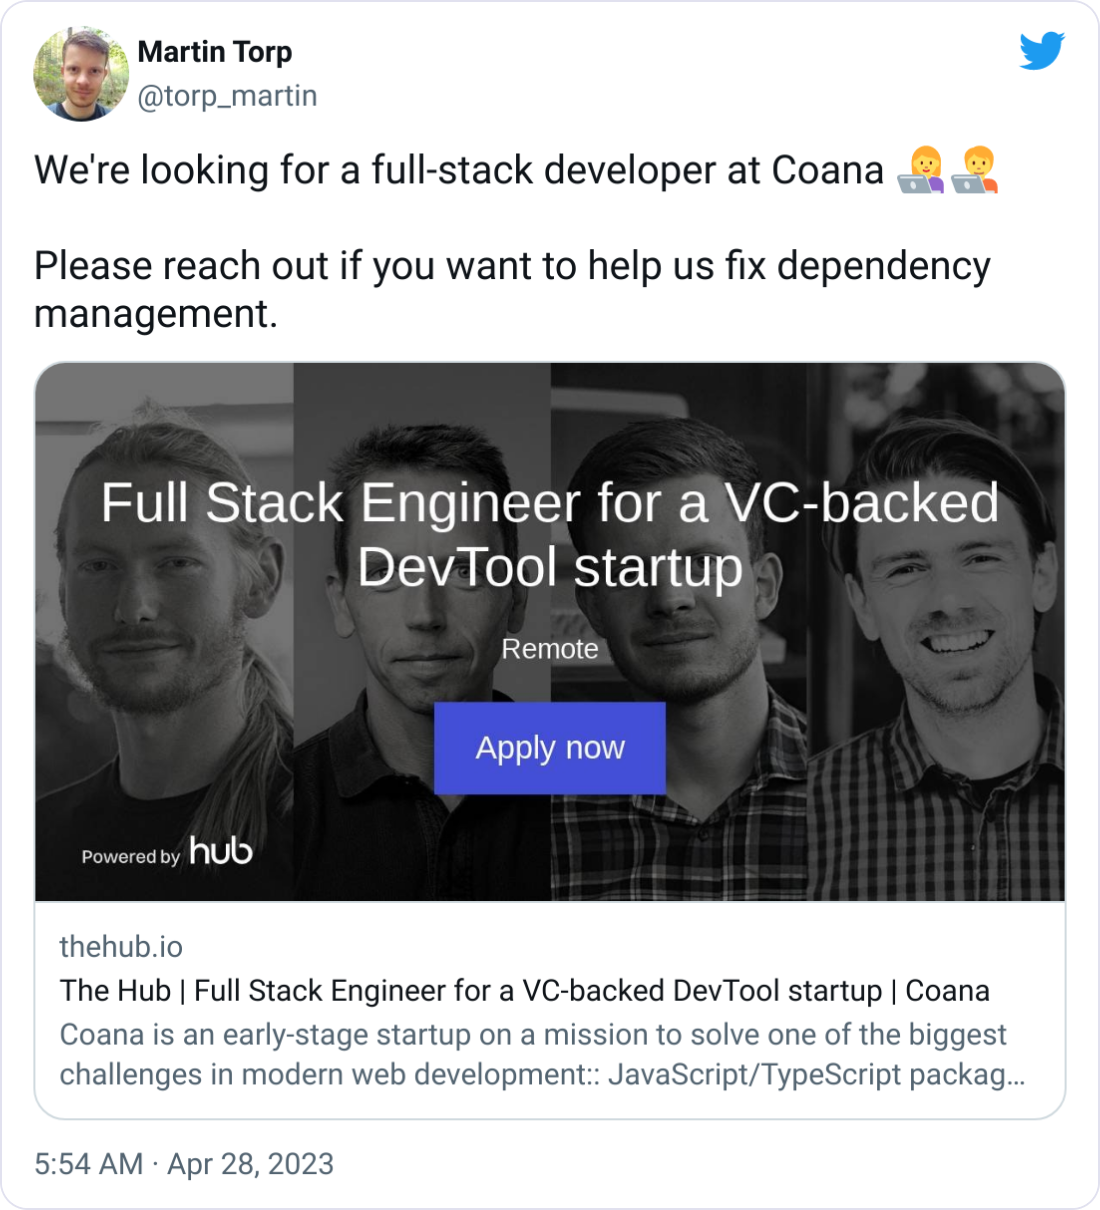 Martin Torp @torp_martin We're looking for a full-stack developer at Coana 👩‍💻🧑‍💻  Please reach out if you want to help us fix dependency management.